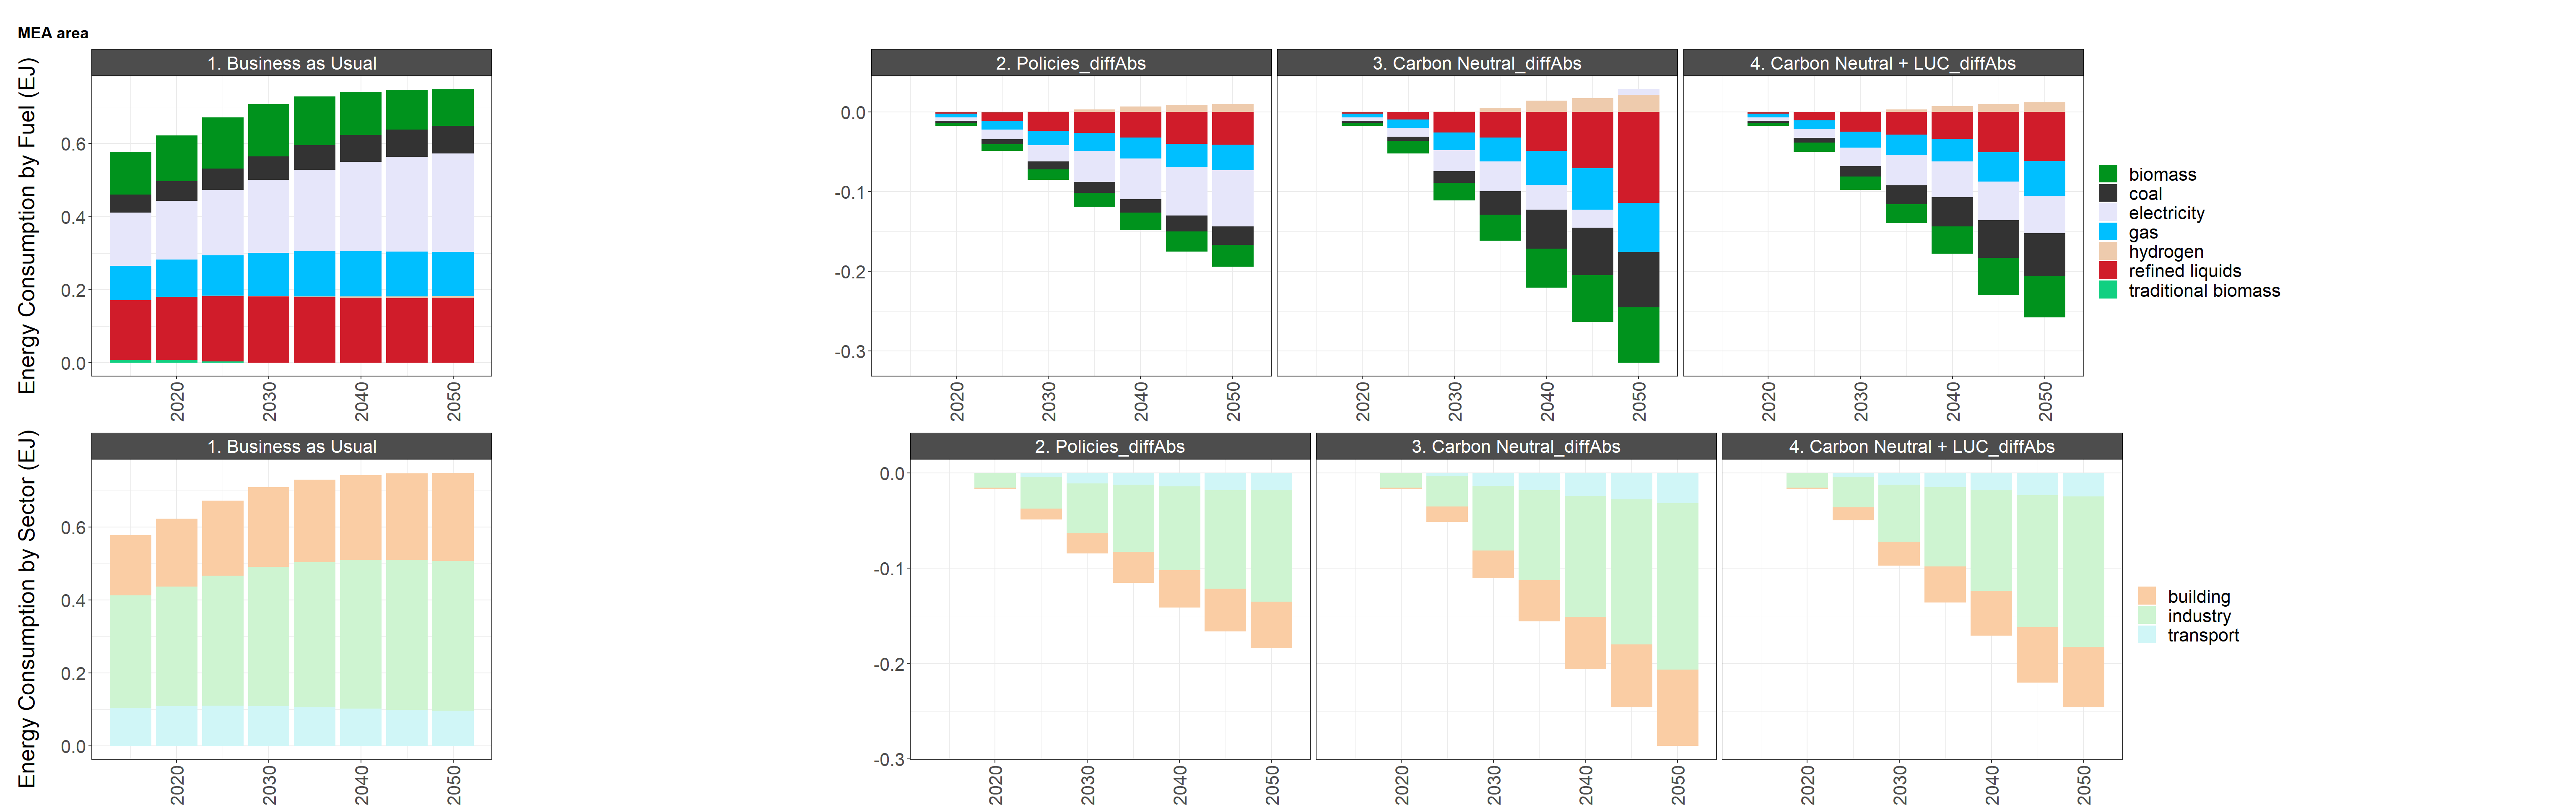 Difference in MEA area final energy consumption by fuel and sector between the reference scenario (left) and the low and high policy scenarios (right)